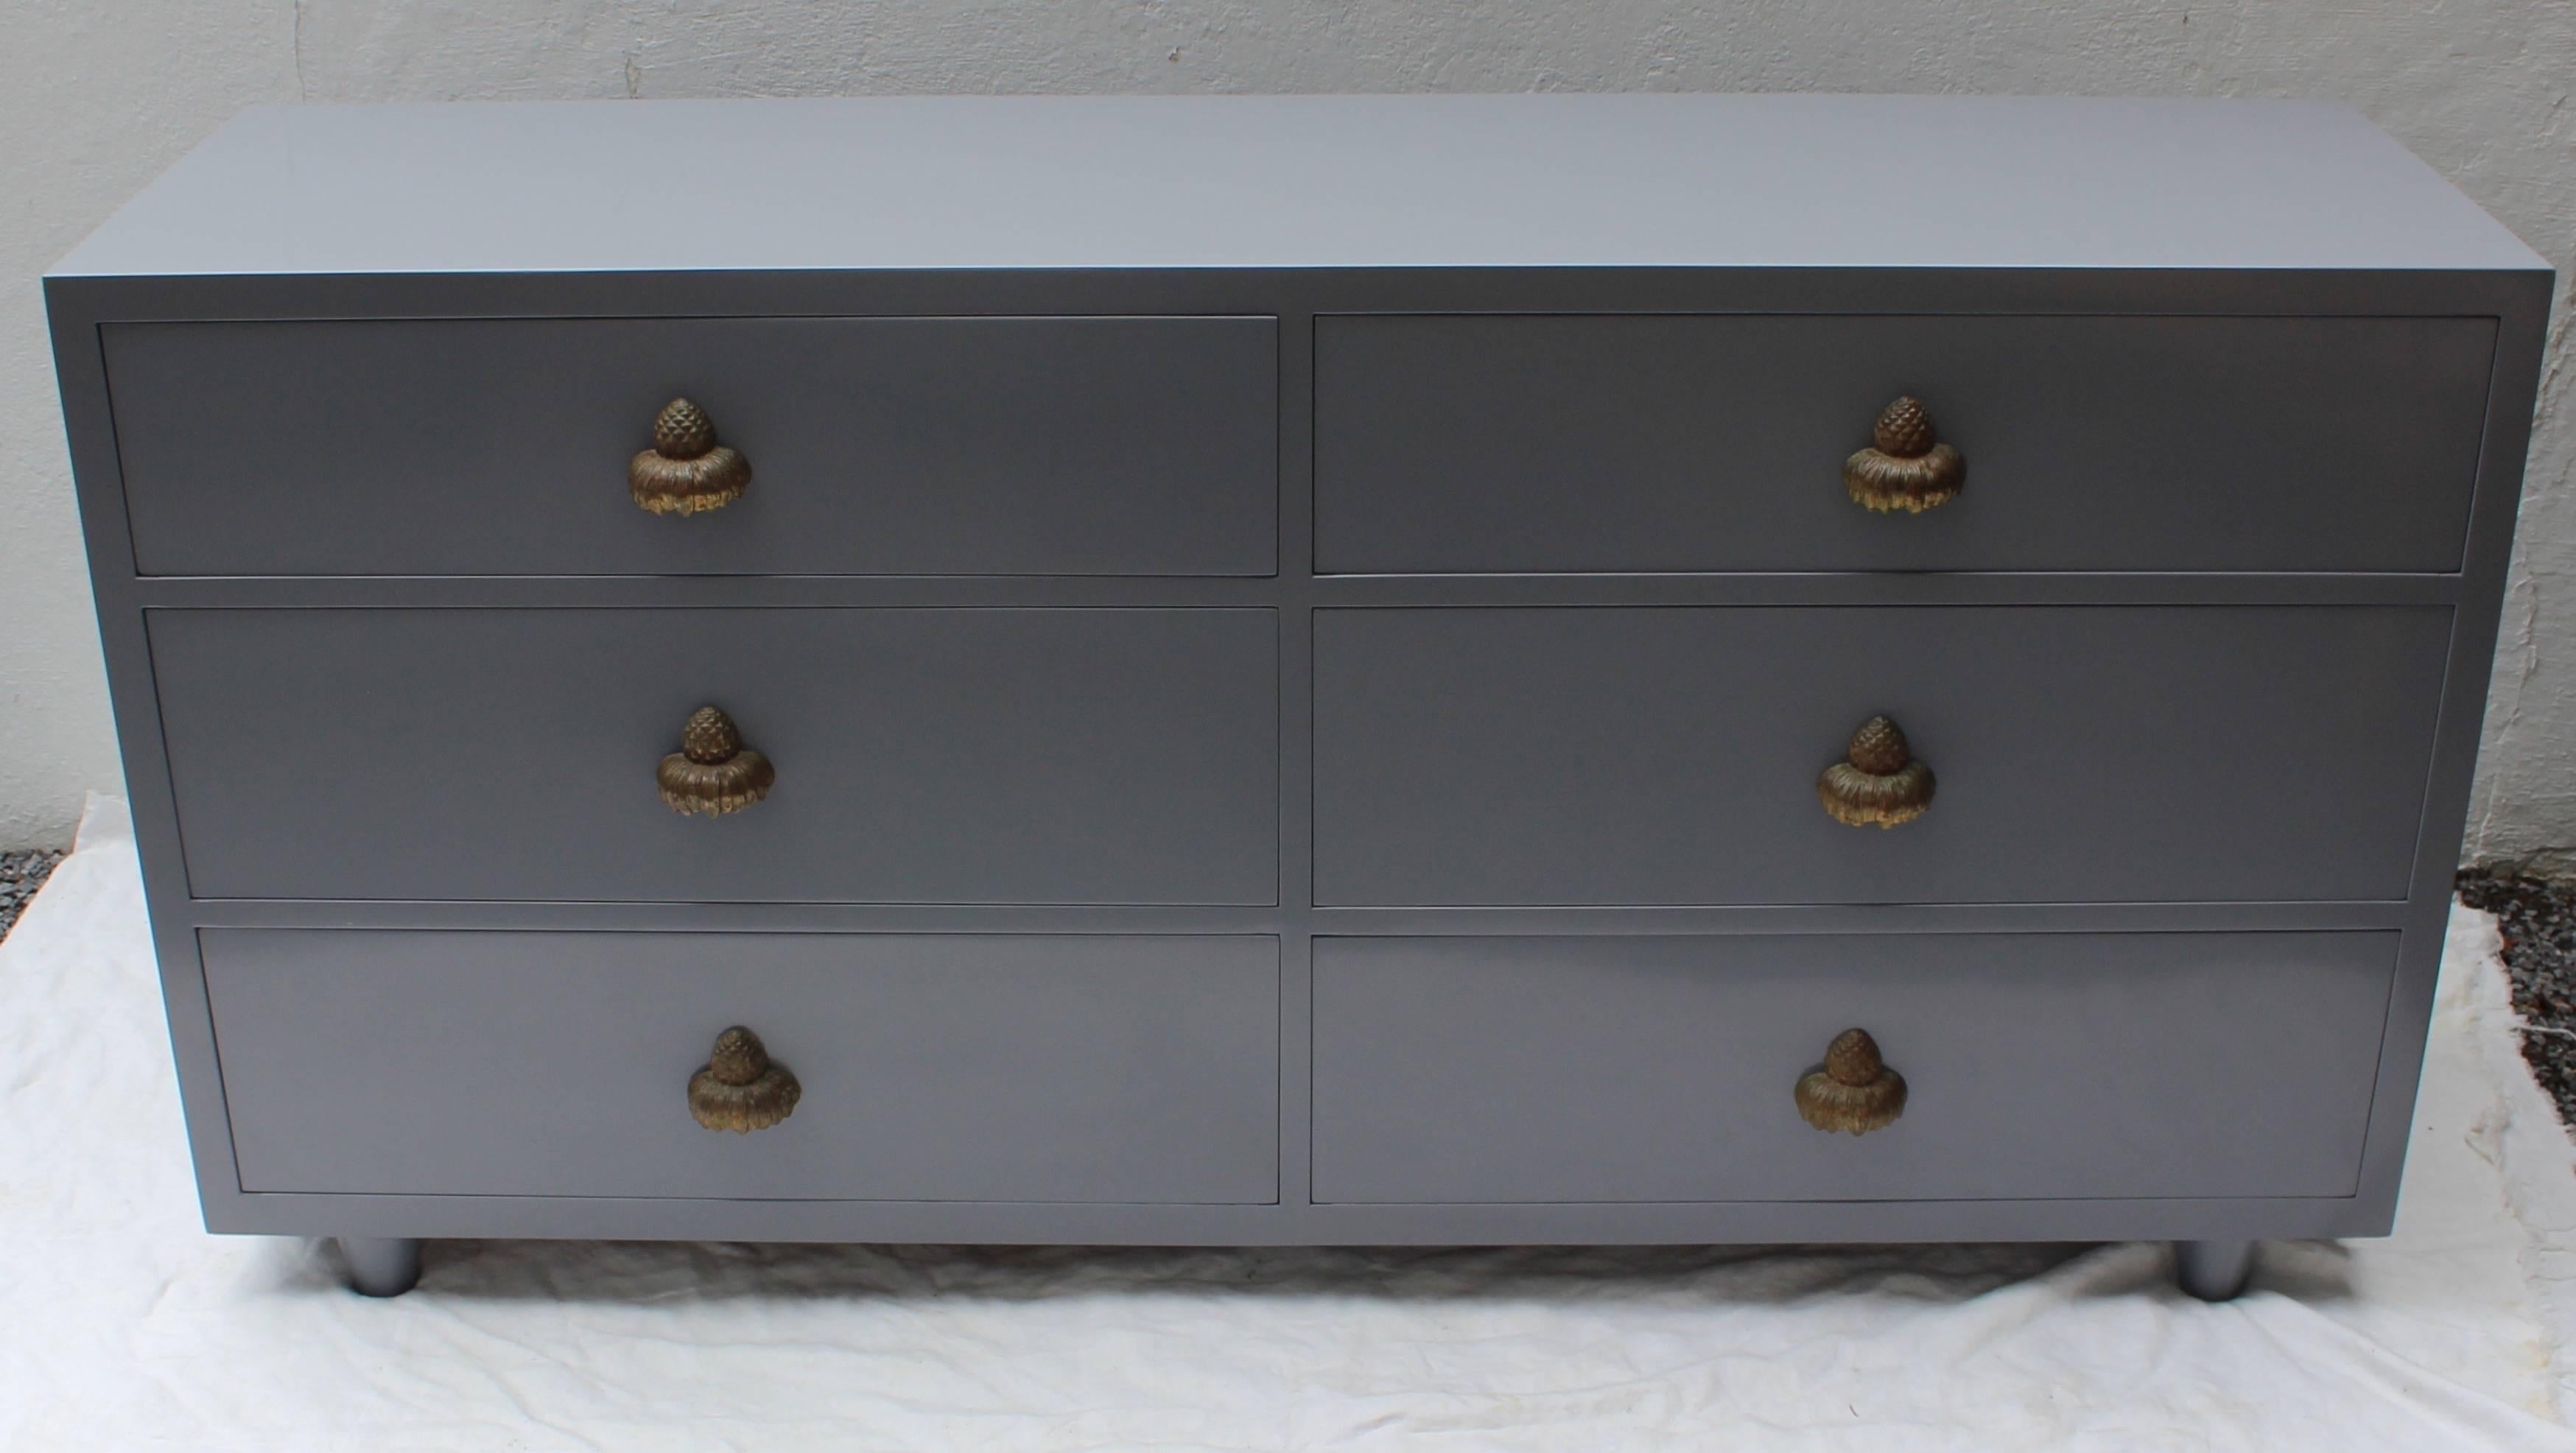 Fabulous and chic grey lacquered six-drawer dresser with exotic pineapple/ pinecone pulls.